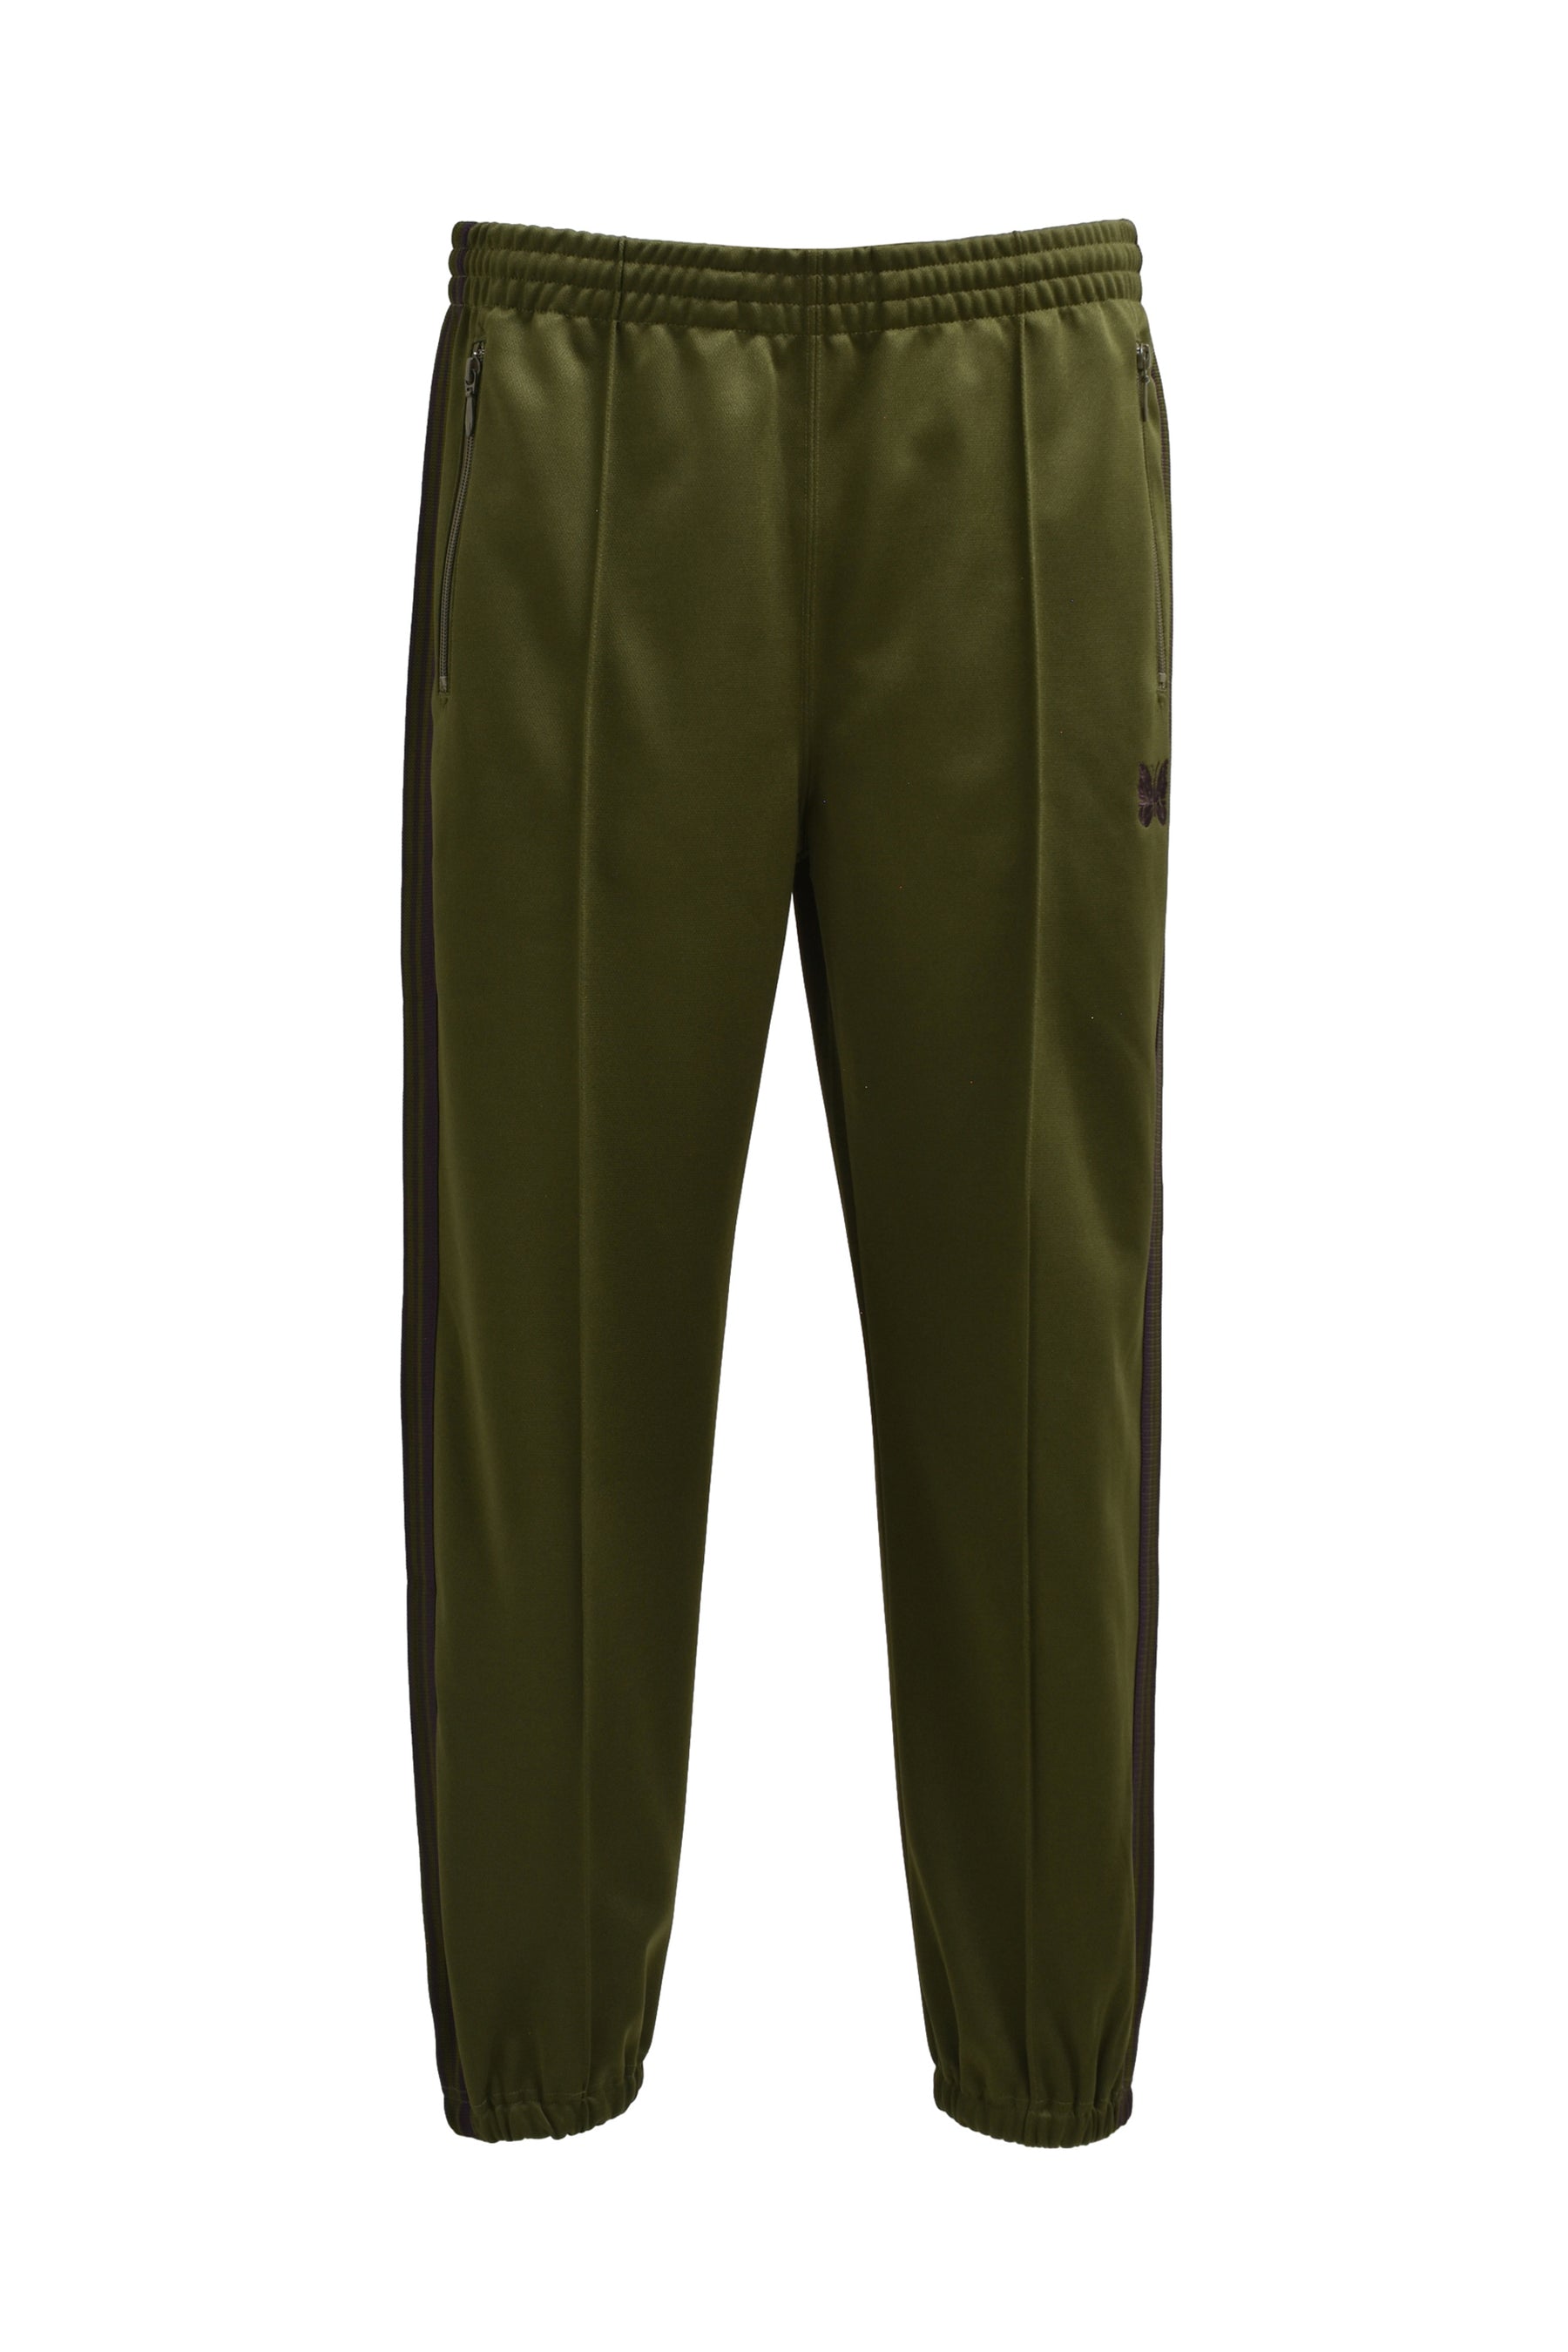 ZIPPED TRACK PANT - POLY SMOOTH / OLV